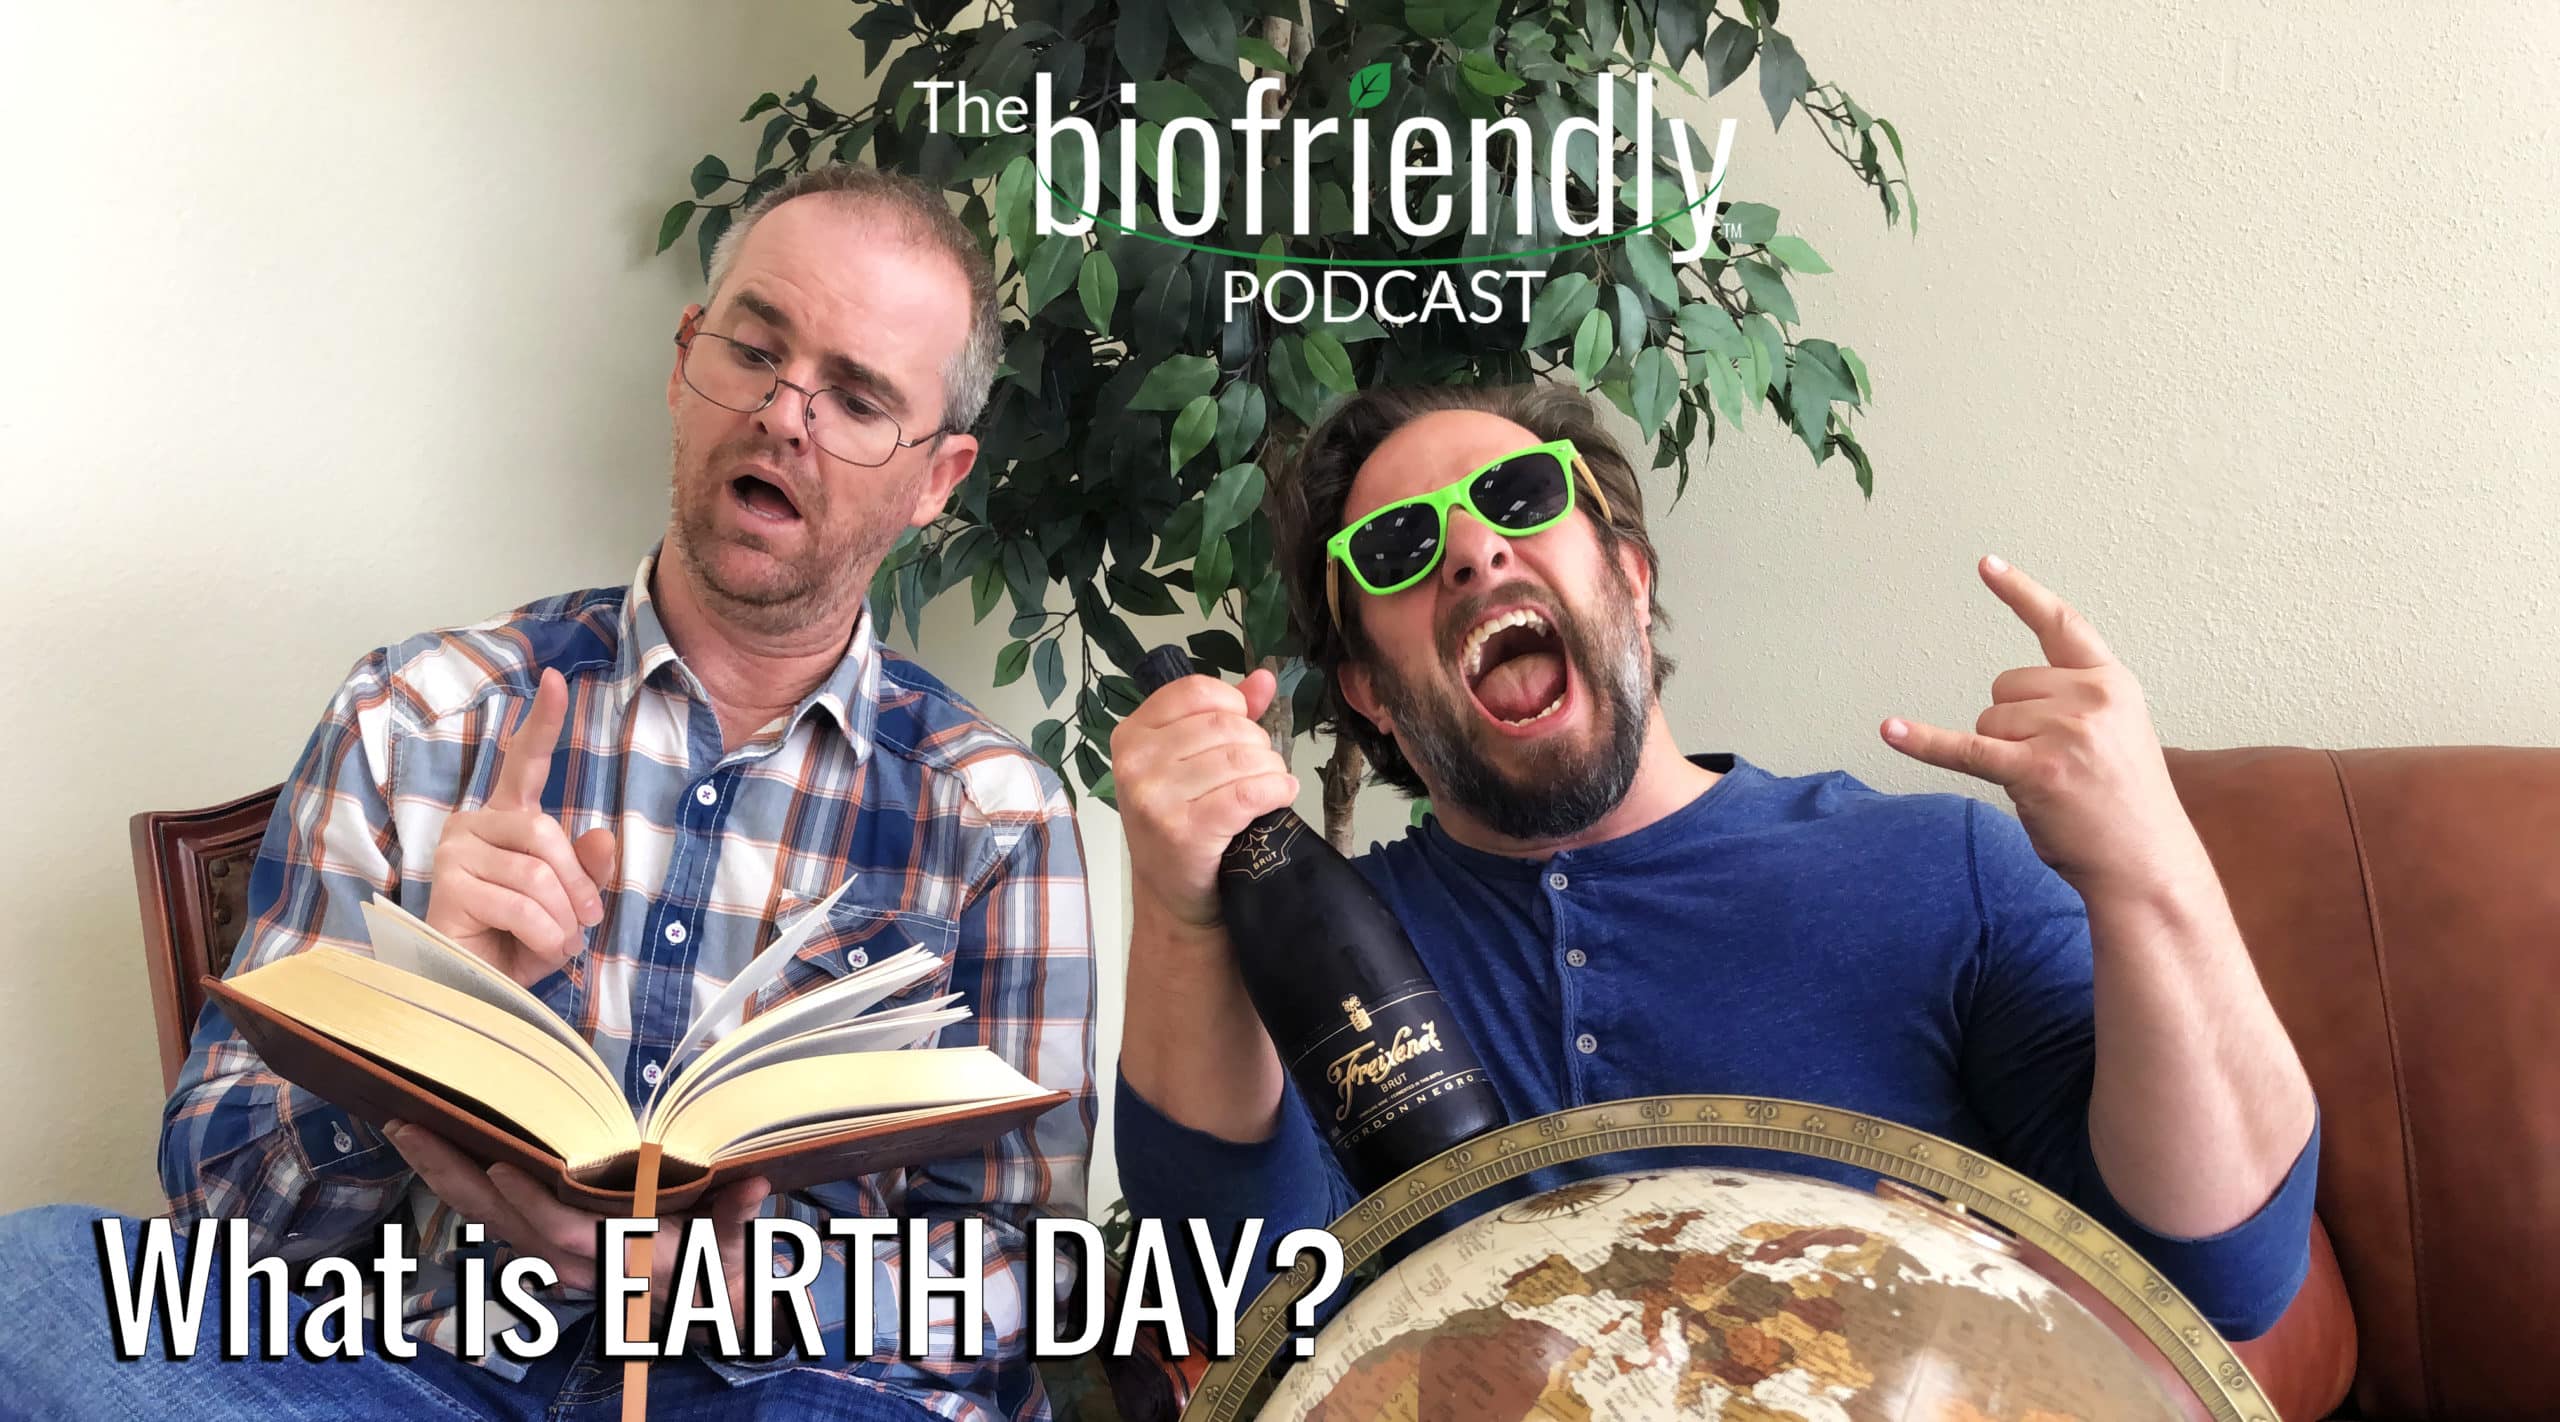 The Biofriendly Podcast - Episode 7 - What is Earth Day?